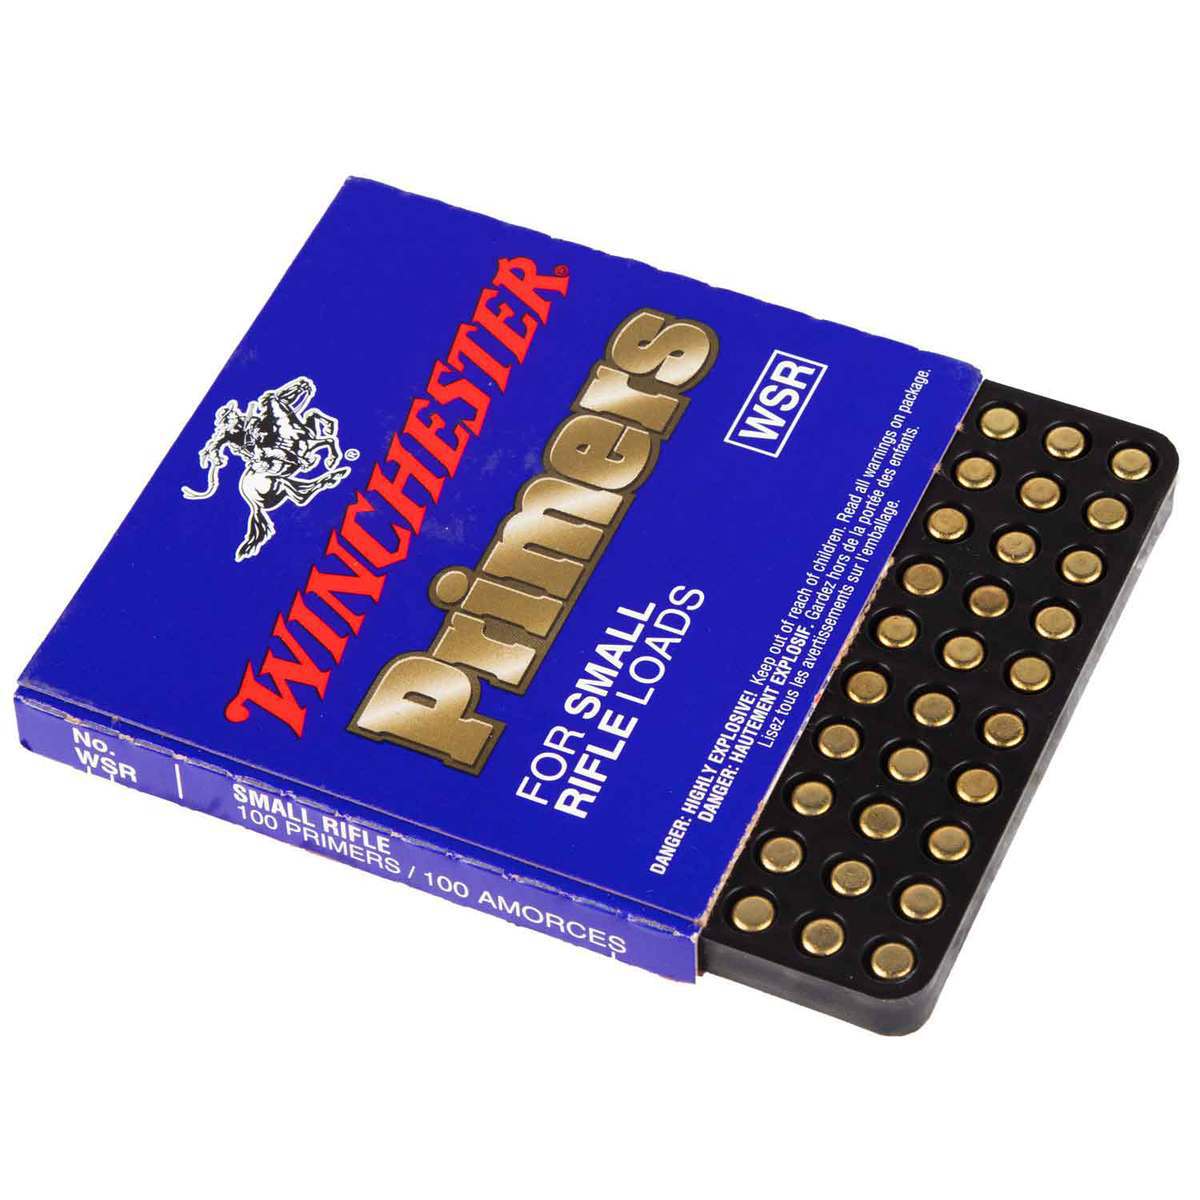 Winchester 6 12 Small Rifle Primers 100 Count Small Rifle